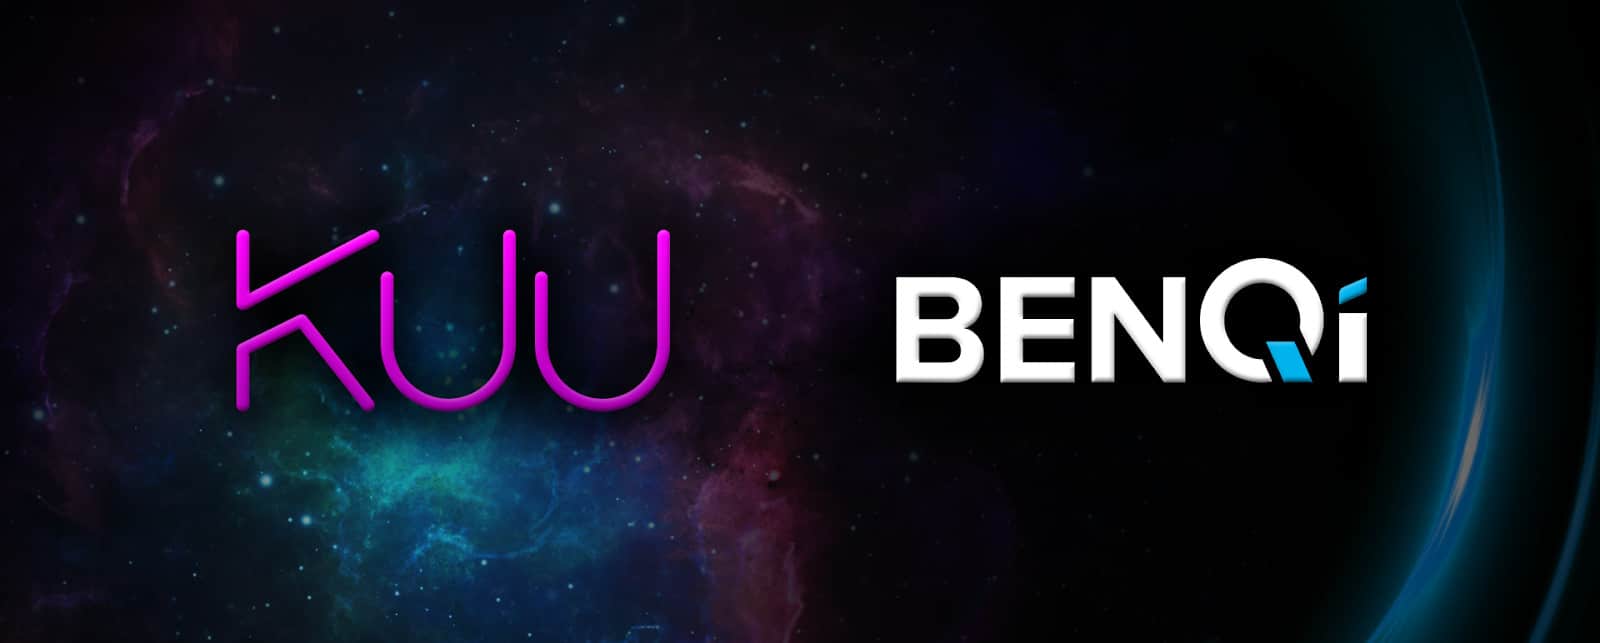 Decentralized Liquidity Underwriter KUU Partners with BENQI to Scale DeFi on Avalanche